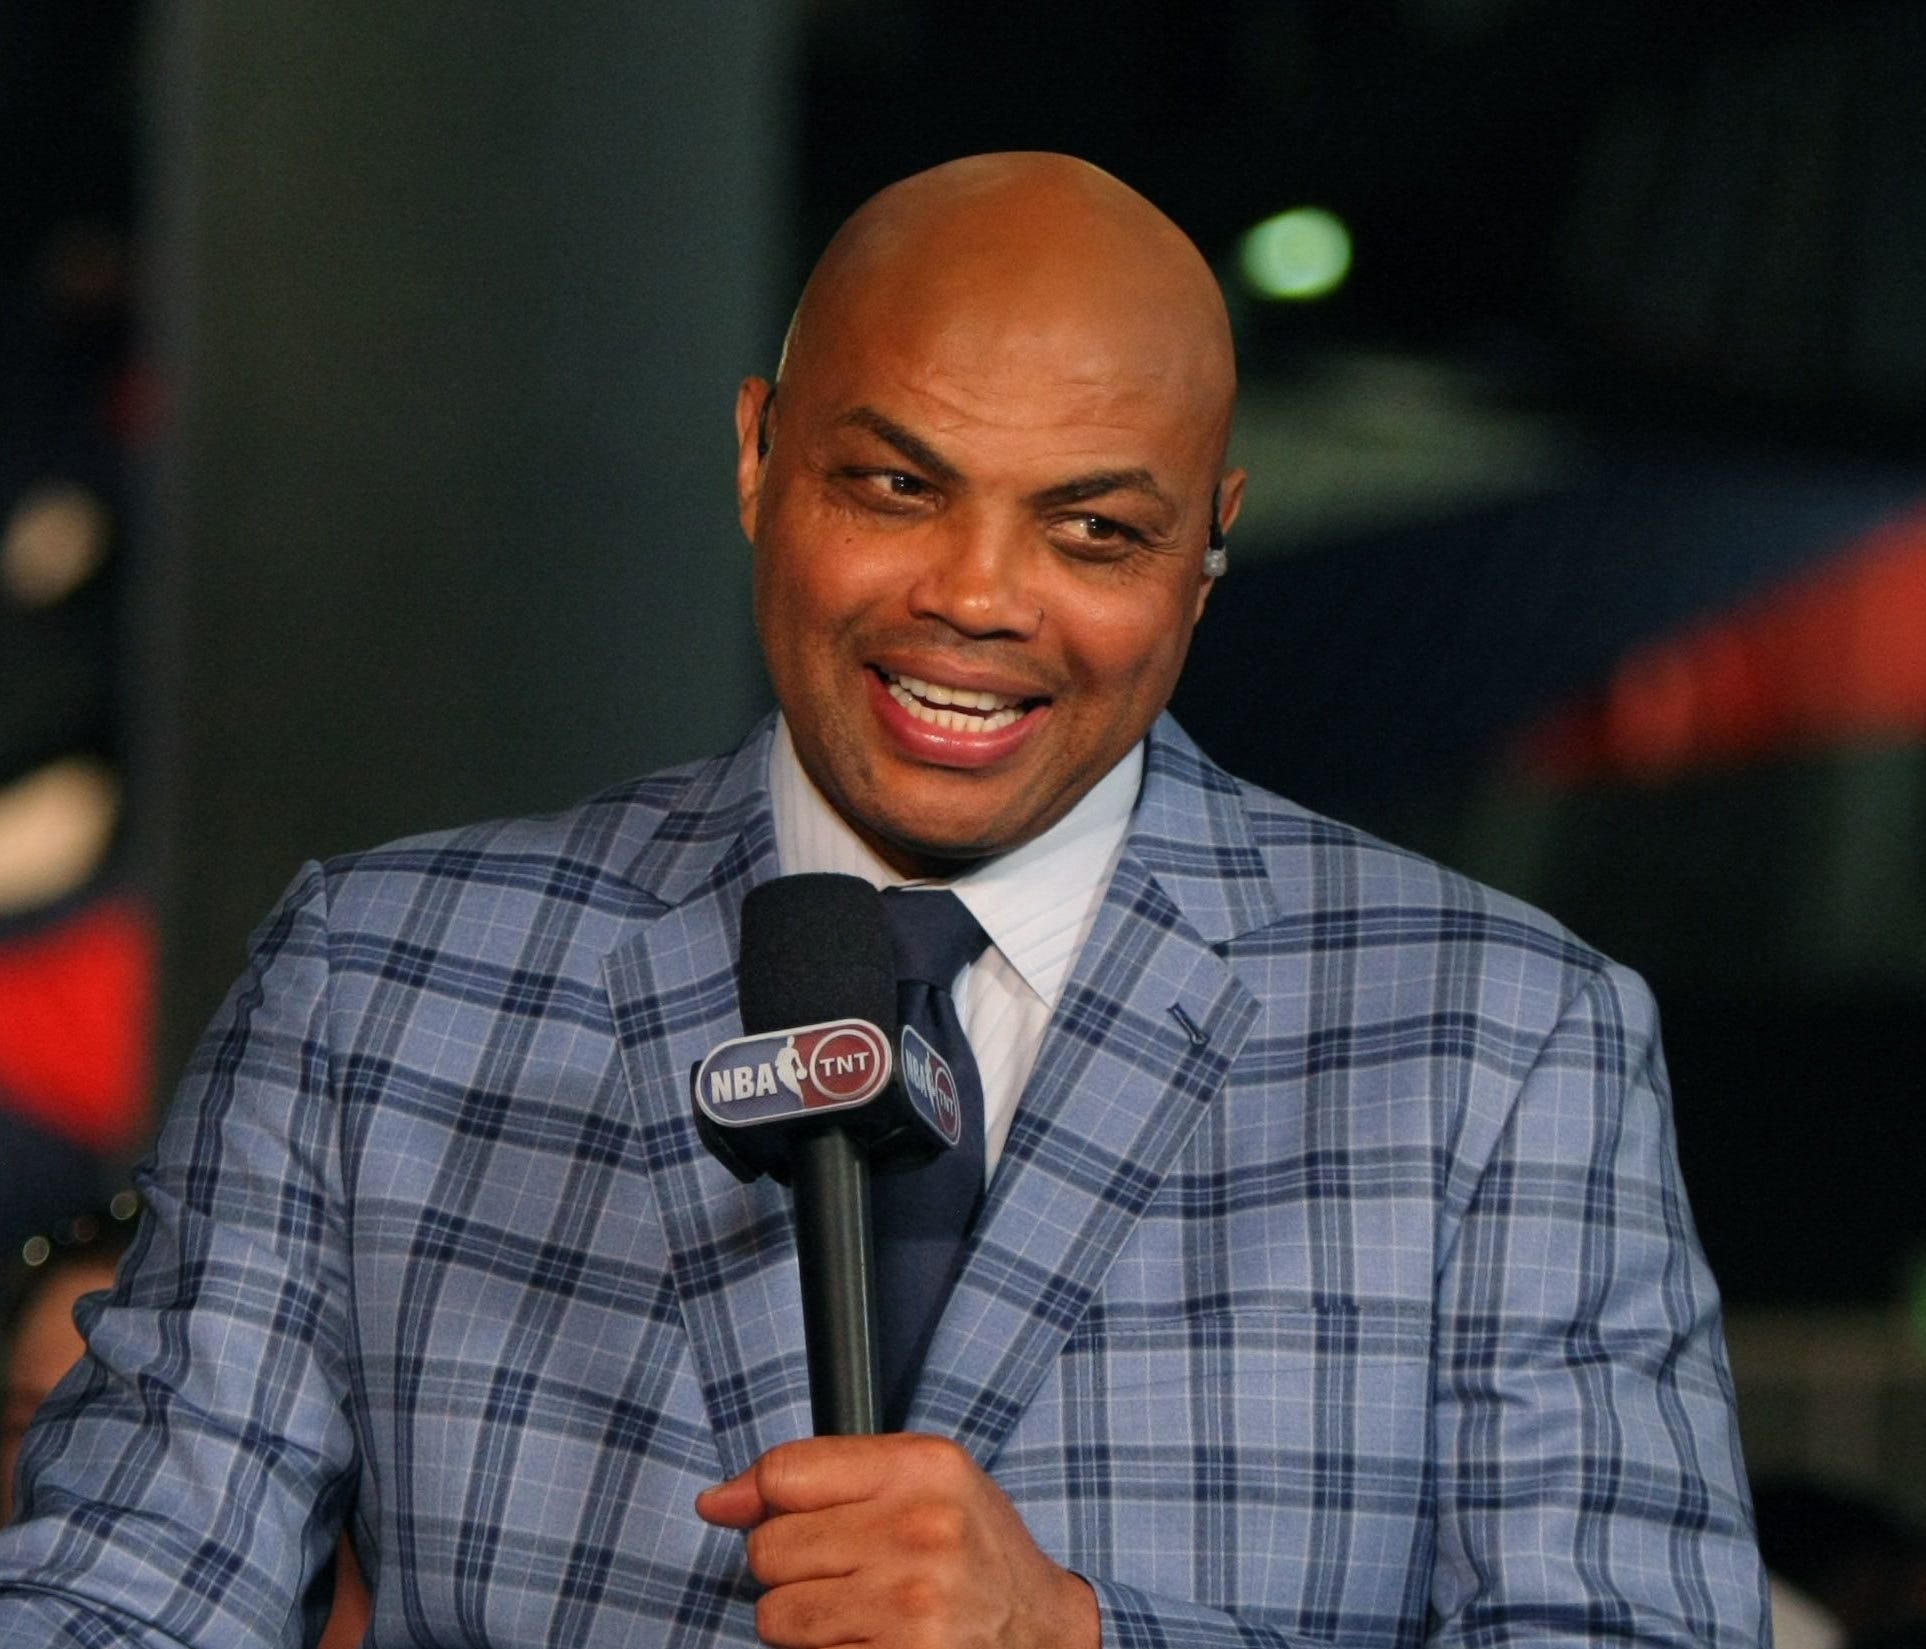 Former NBA player and current TNT television personality Charles Barkley is a big hockey fan.